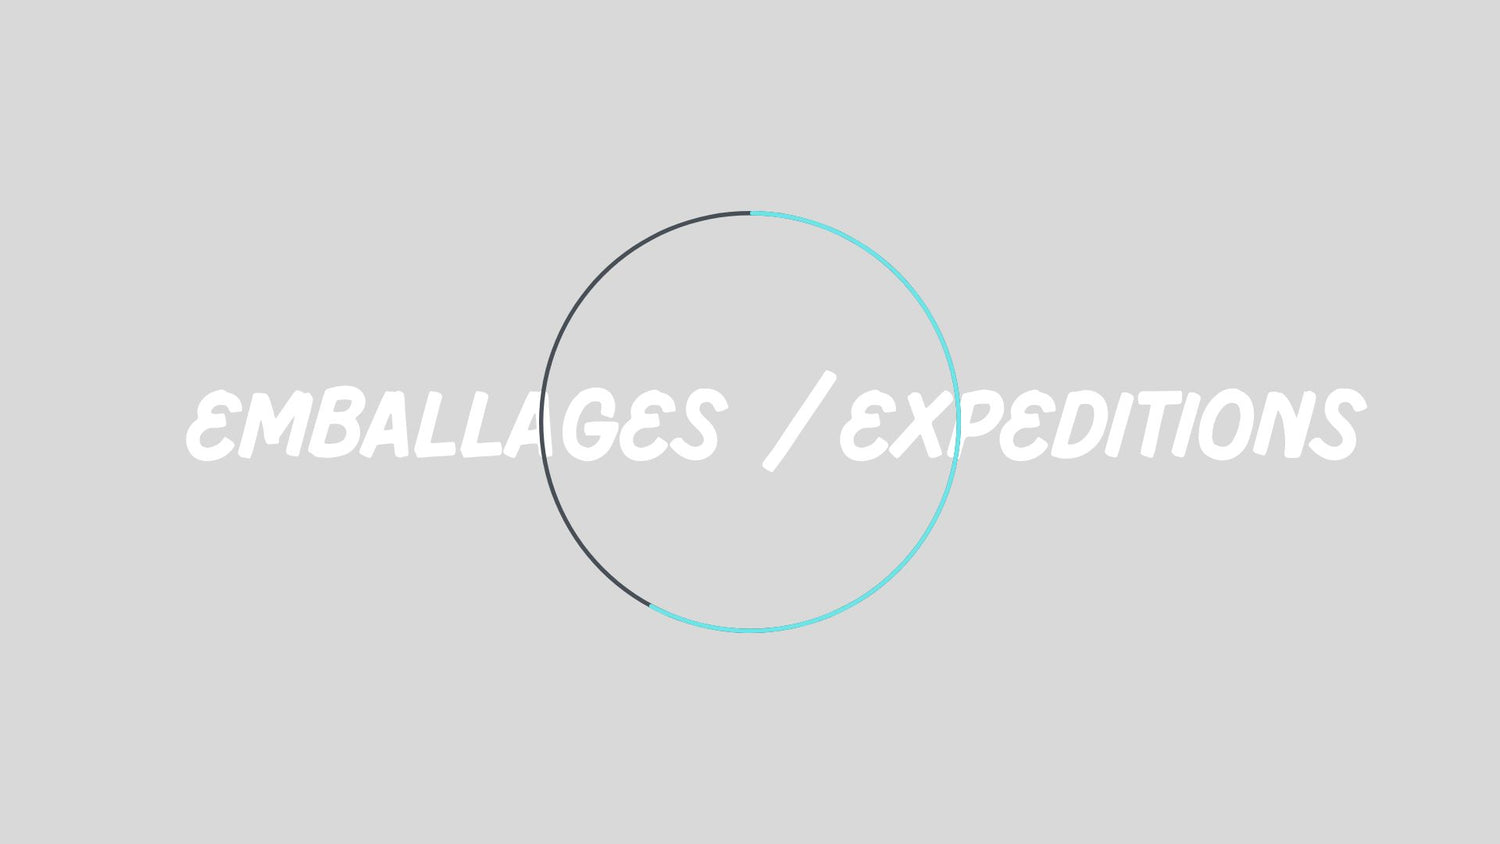 Emballage et Expedition